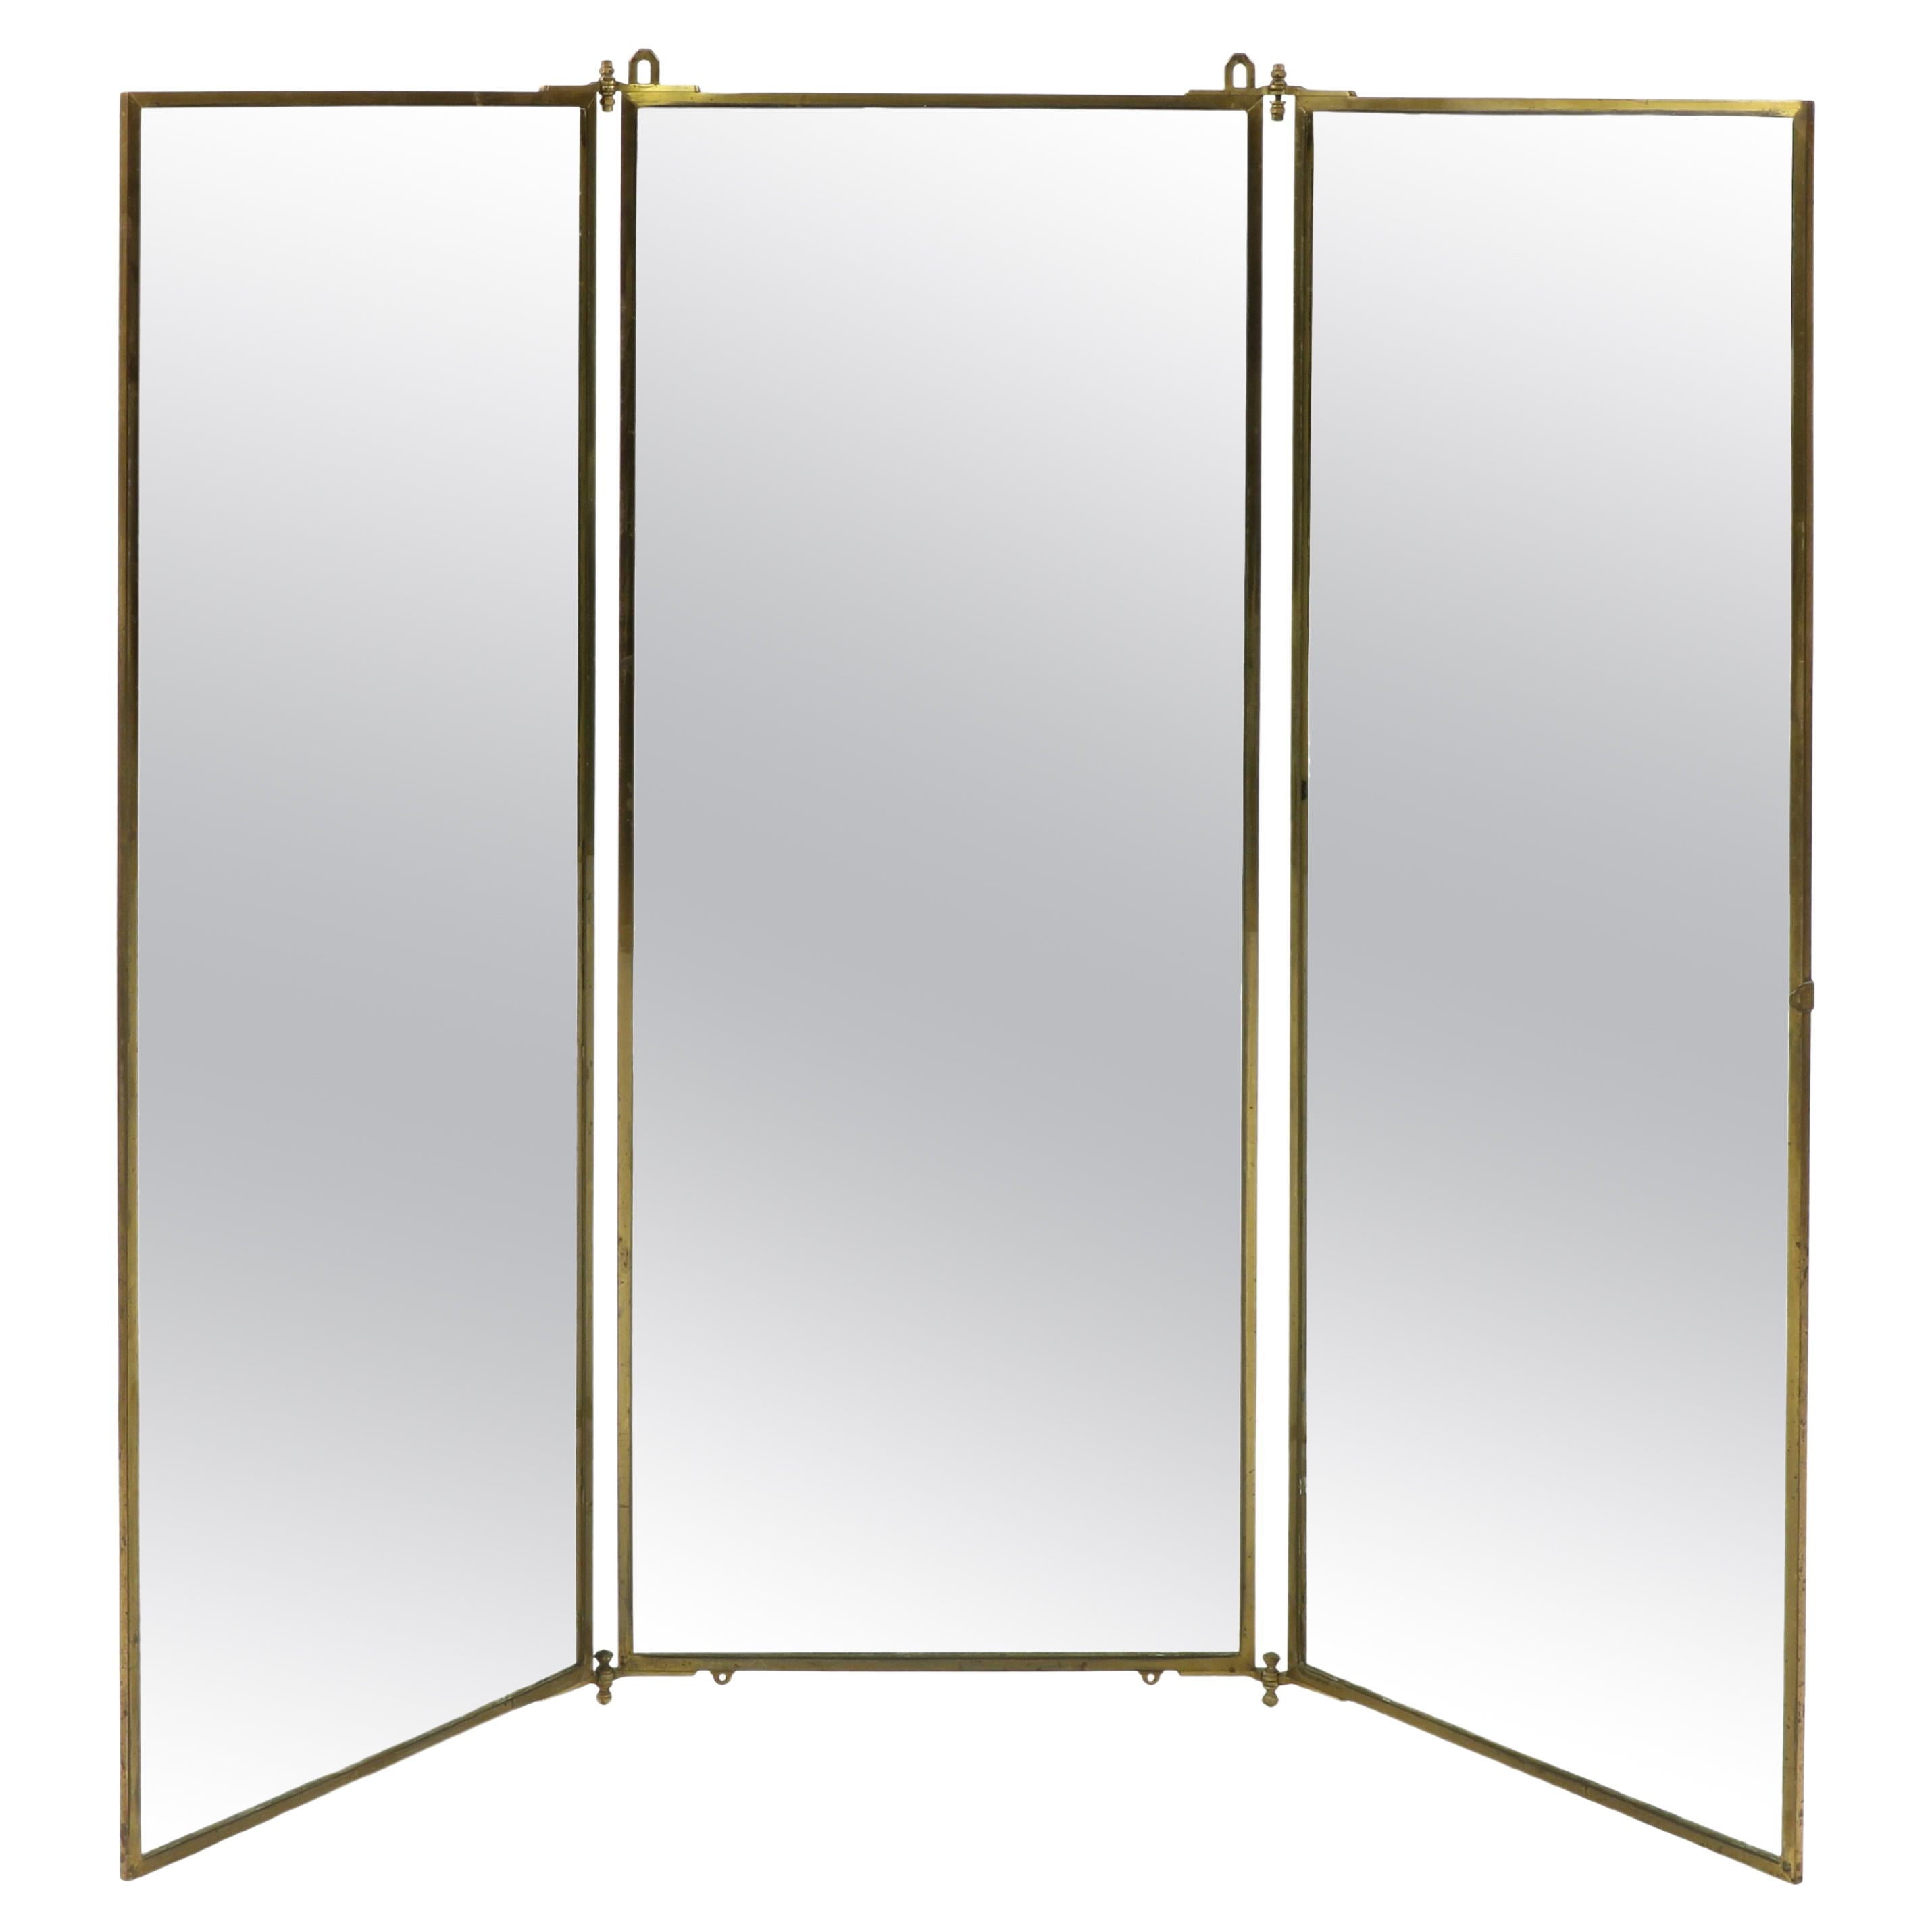 Tall standing brass triptych mirror by Maison Brot. YSL favourite !